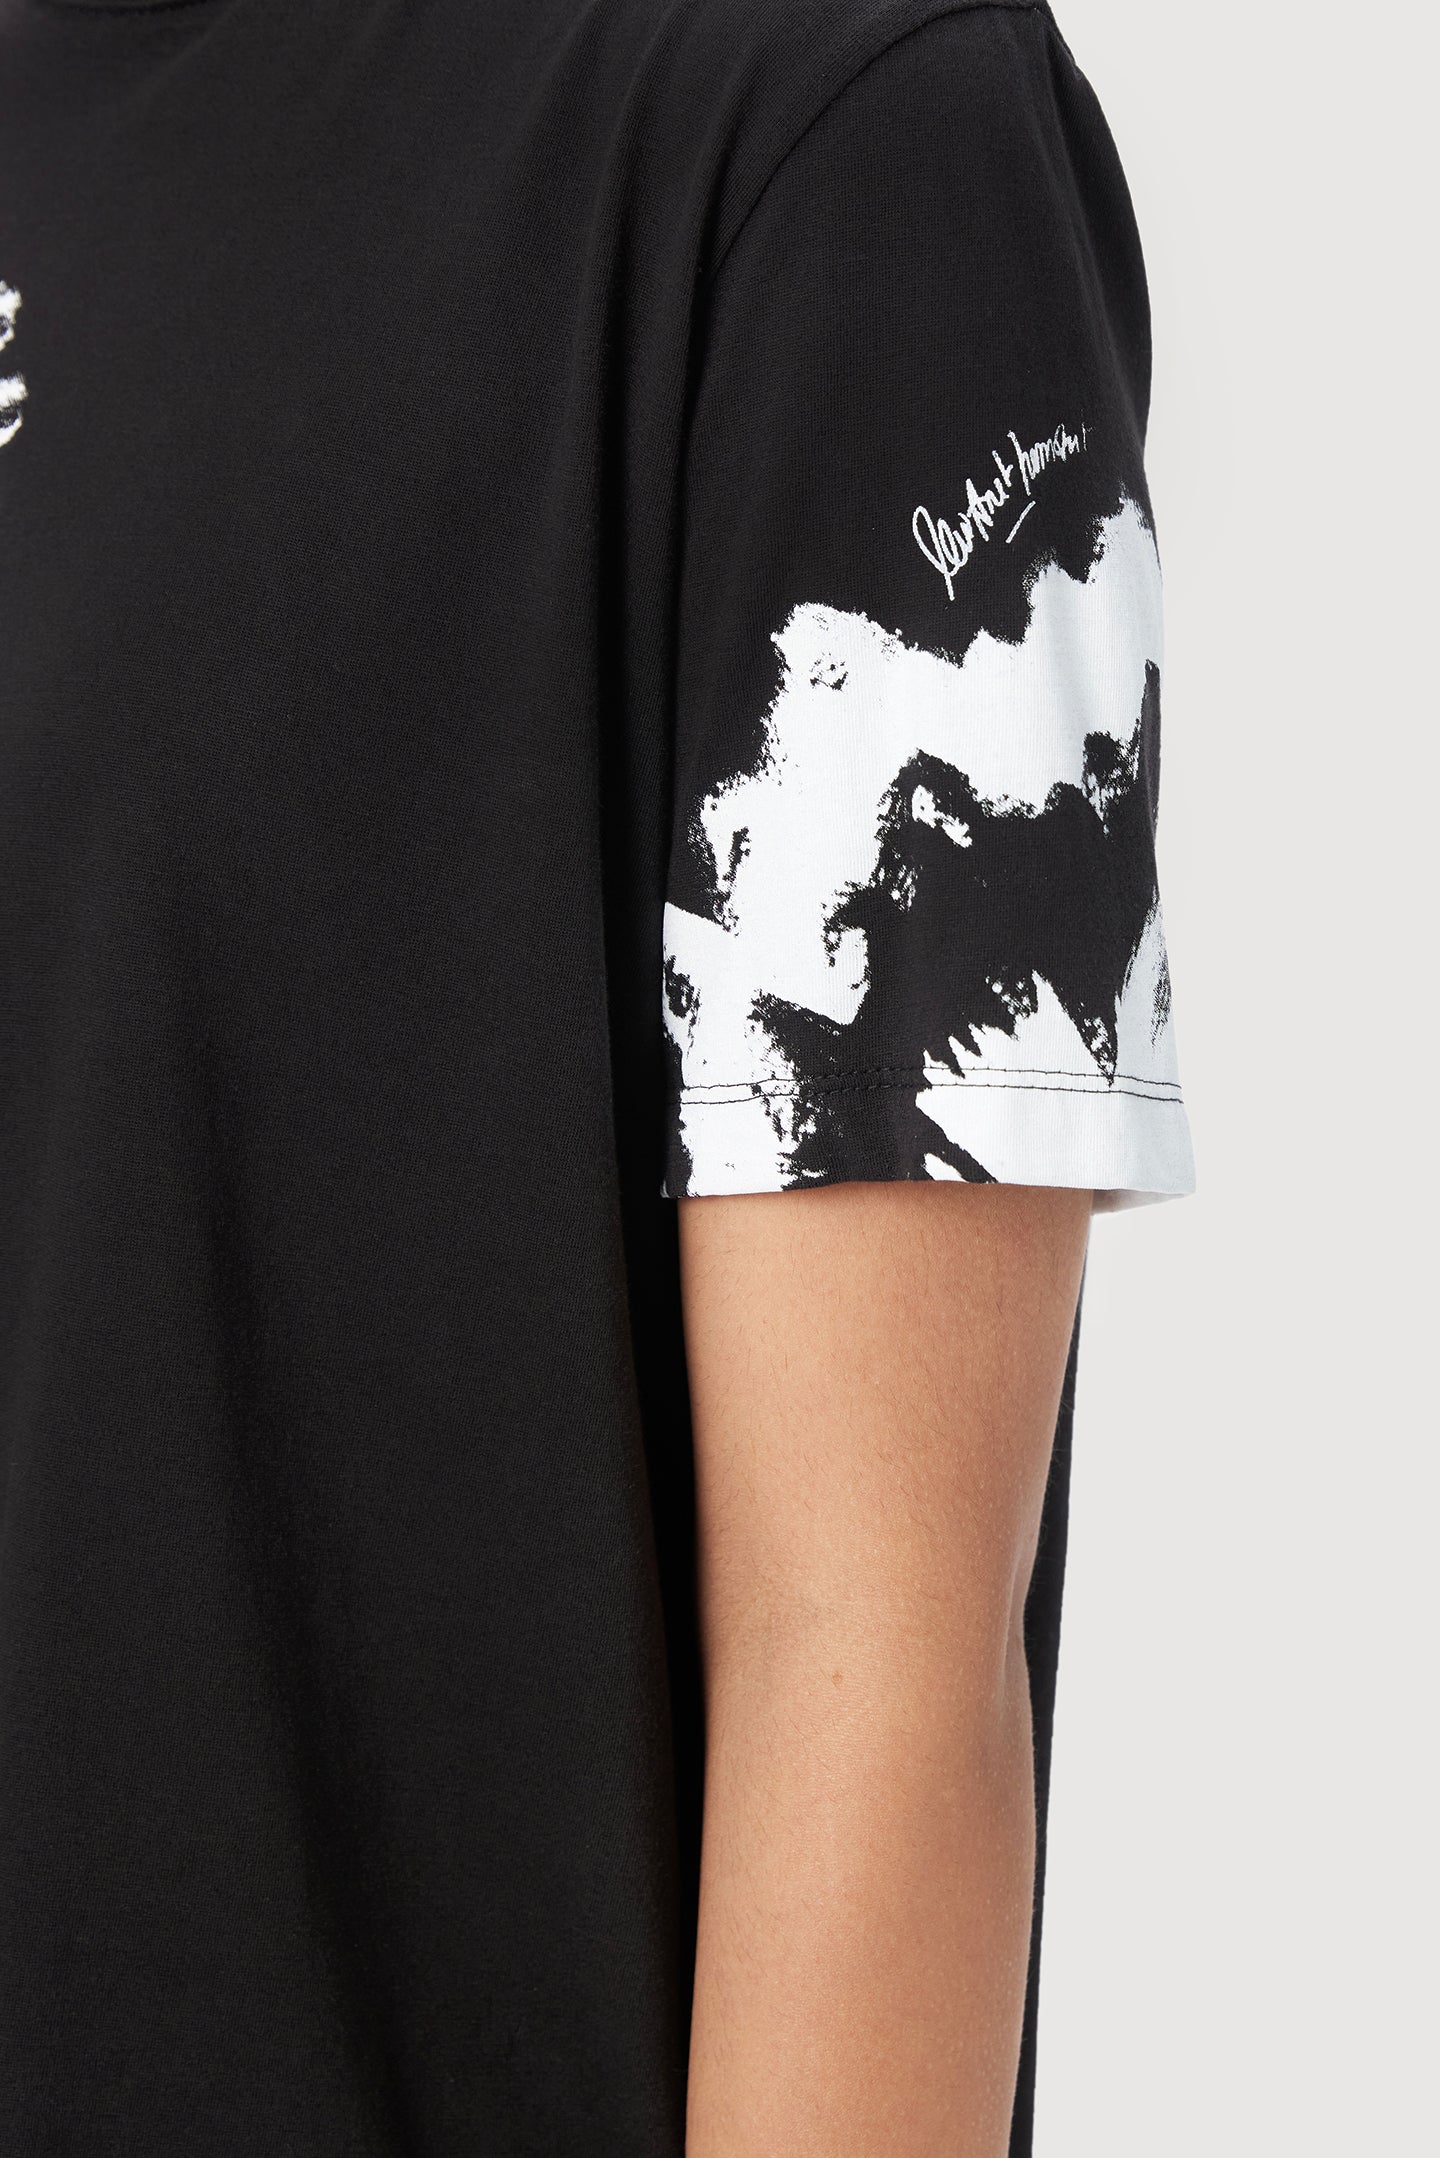 Regular Fit T-Shirt Featuring Stylish Gingko Print Placement